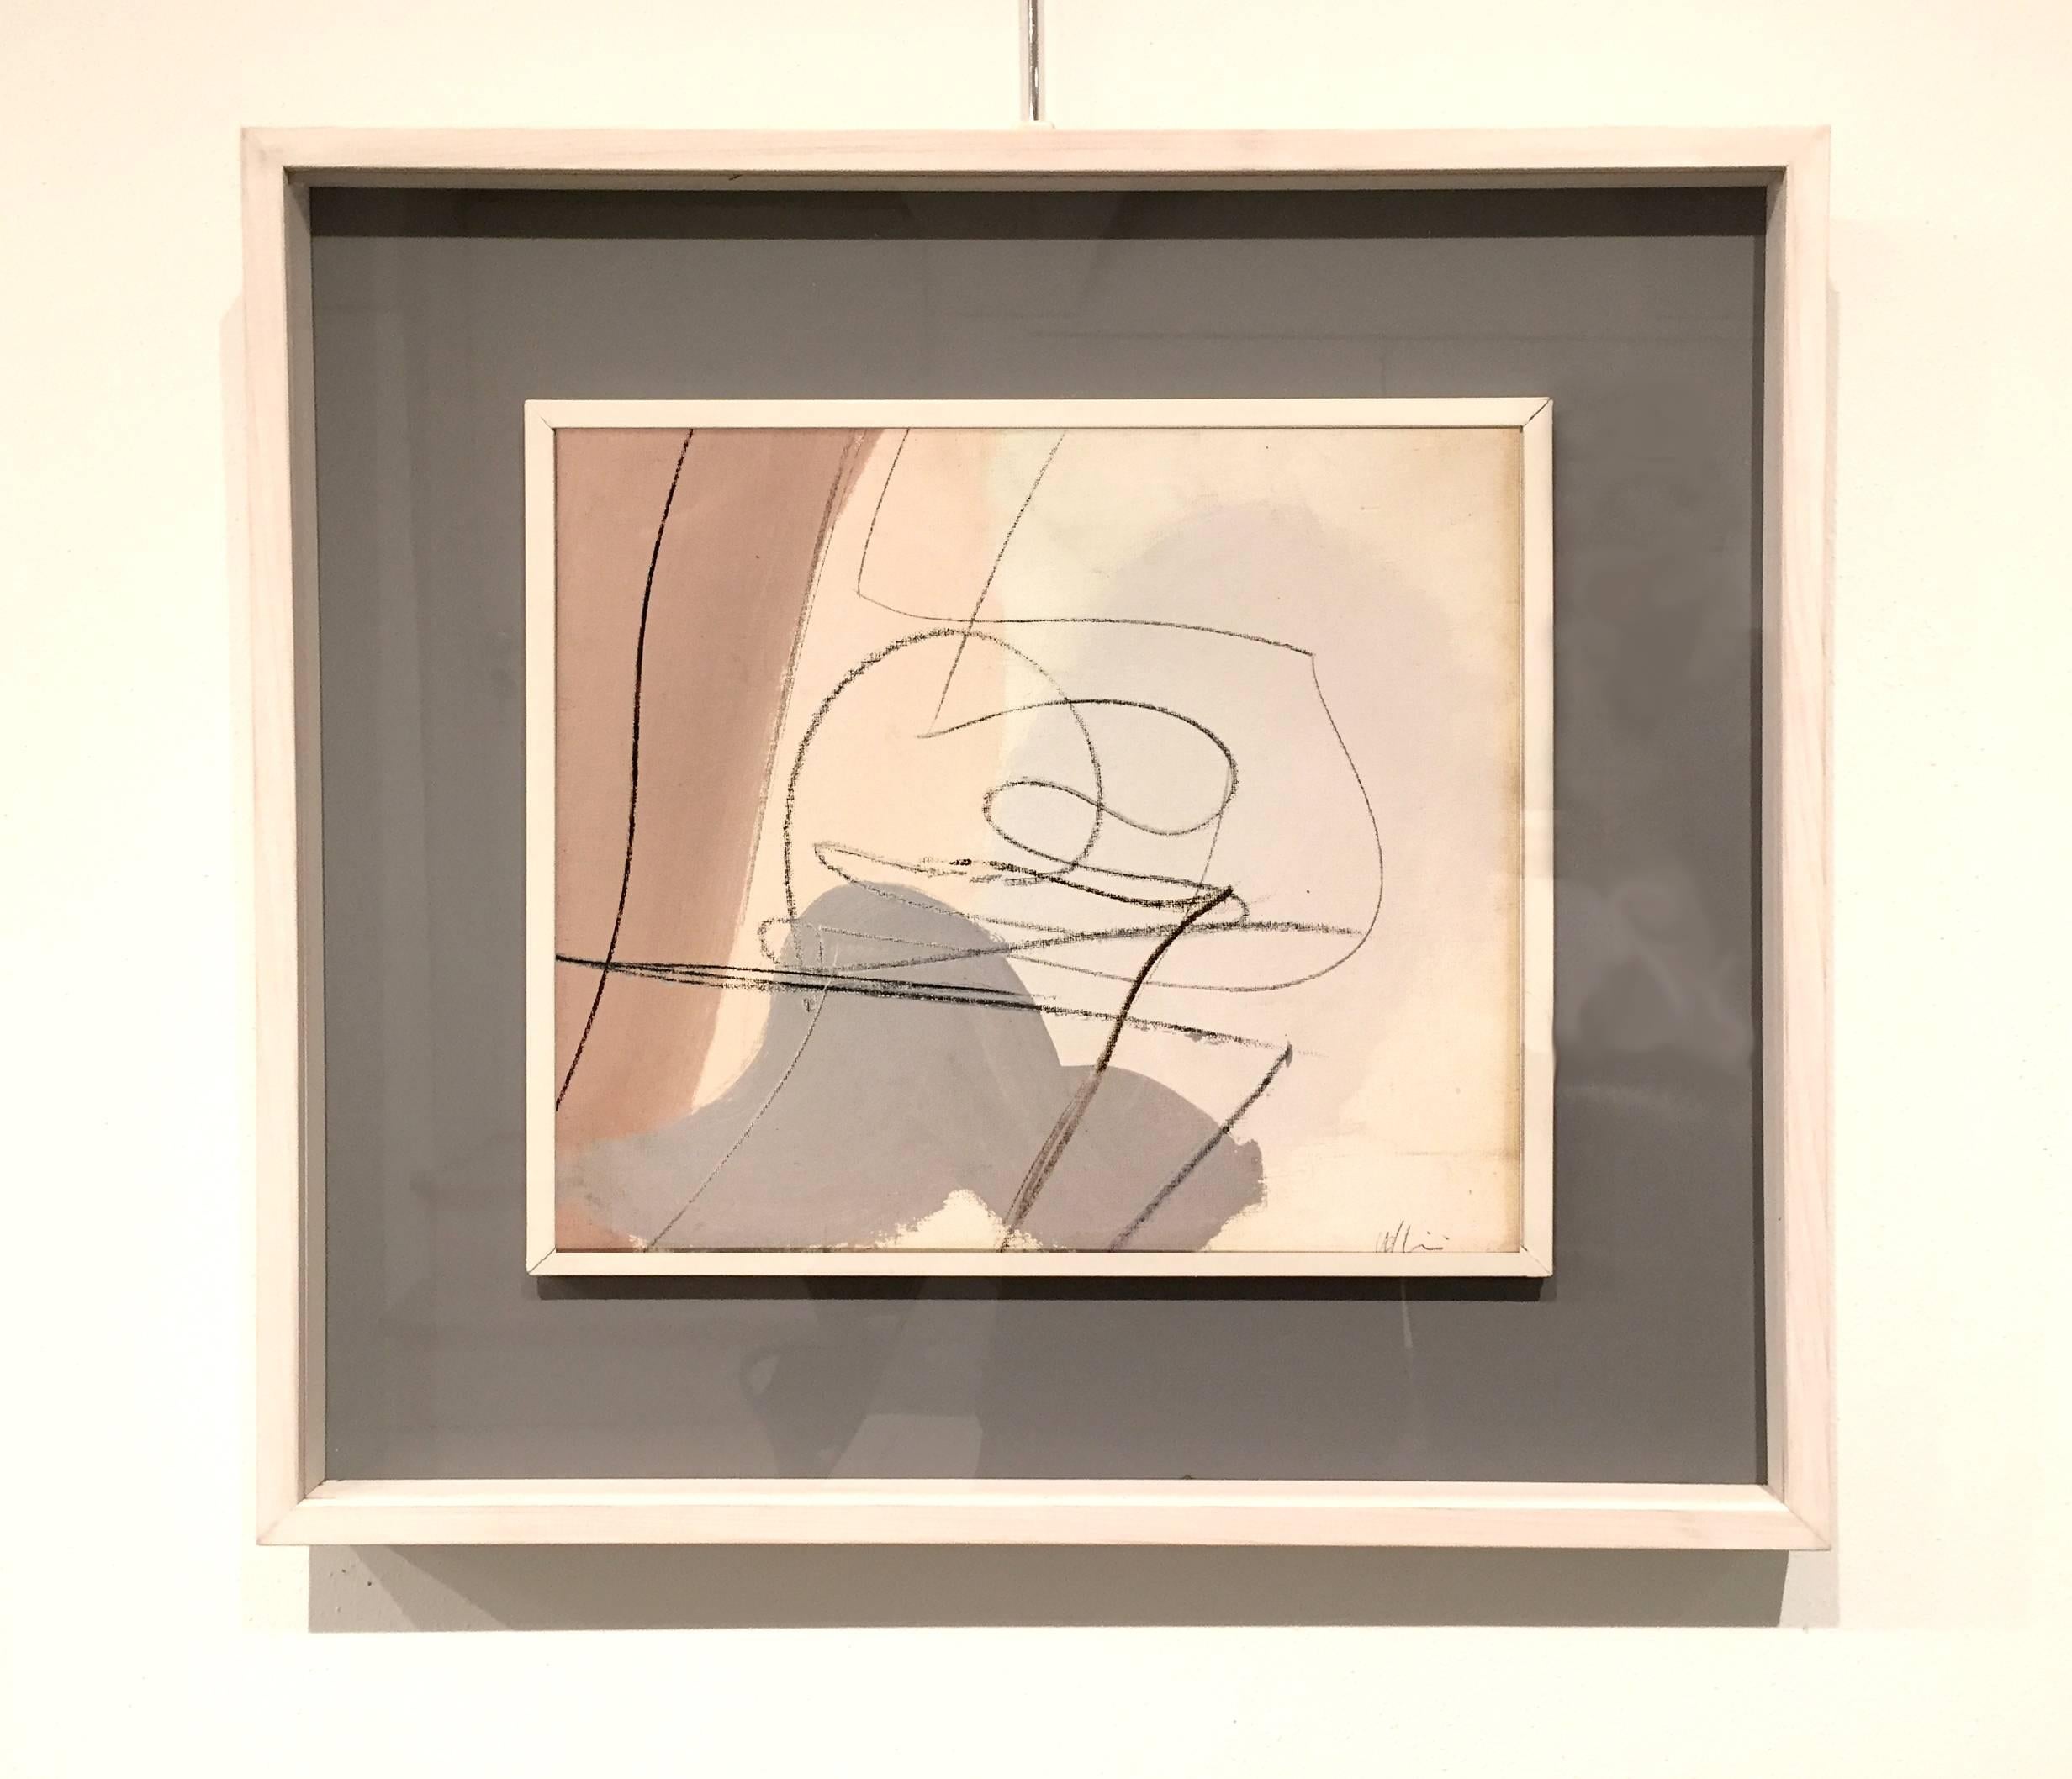 Renato Volpini (1934 - 2017) Composizione Astratta, 1961, oil on canvas;  signed lower right, signed and dated on the verse.

SIZE: cm. 30 X 35
SIZE WITH FRAME: cm. 50 X 55 X 5

Movement and style: Informal Art - Abstraction  - Abstract



